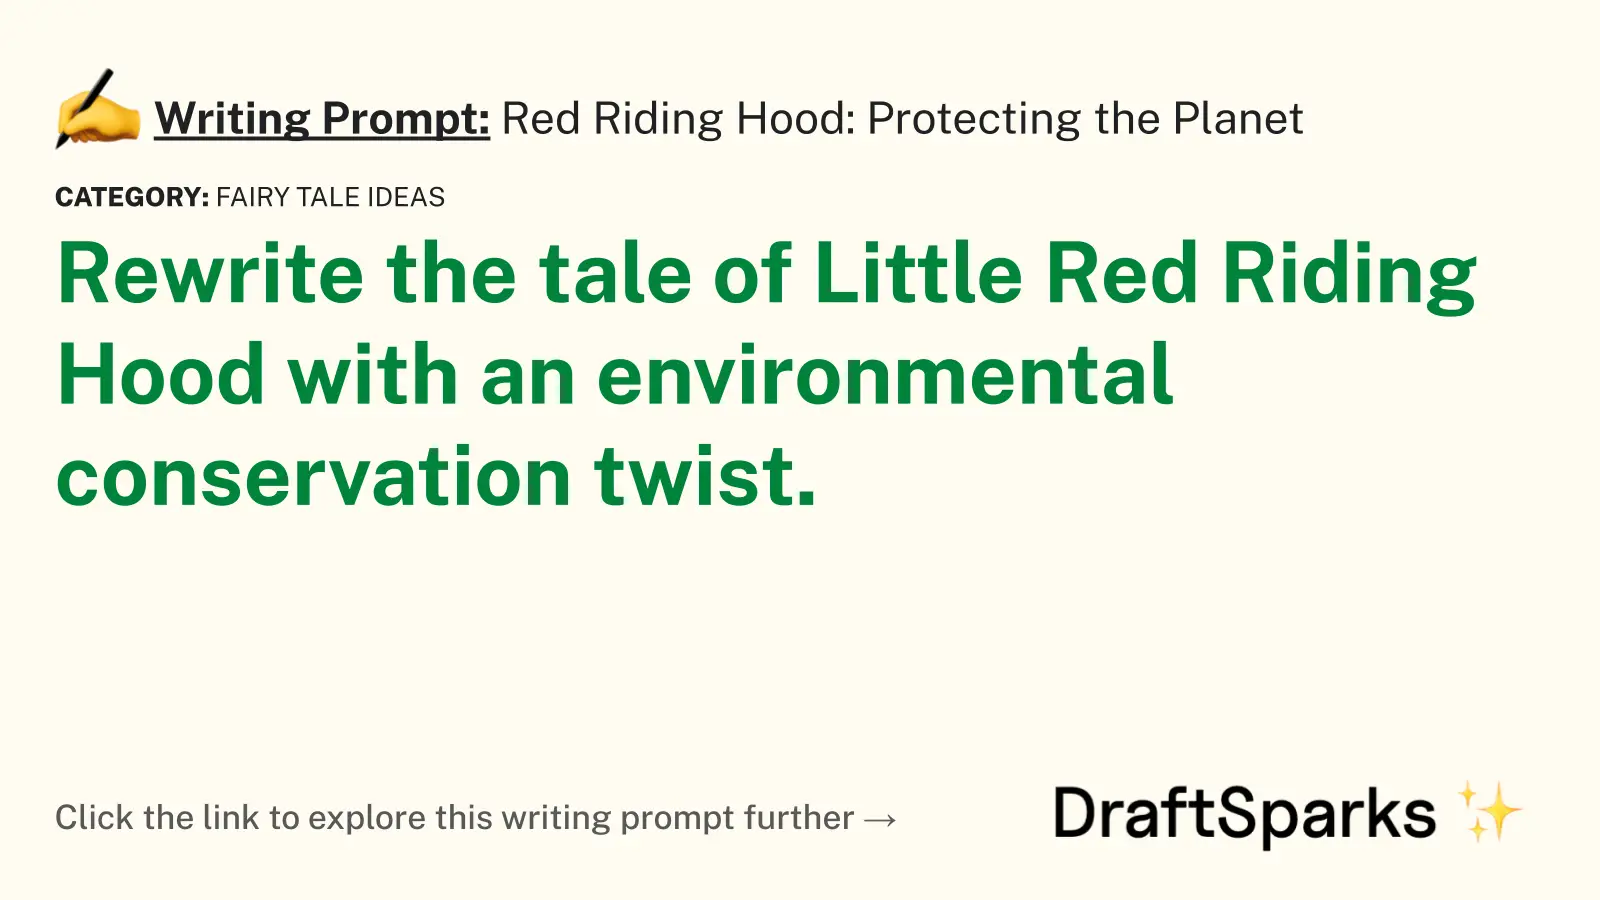 Red Riding Hood: Protecting the Planet